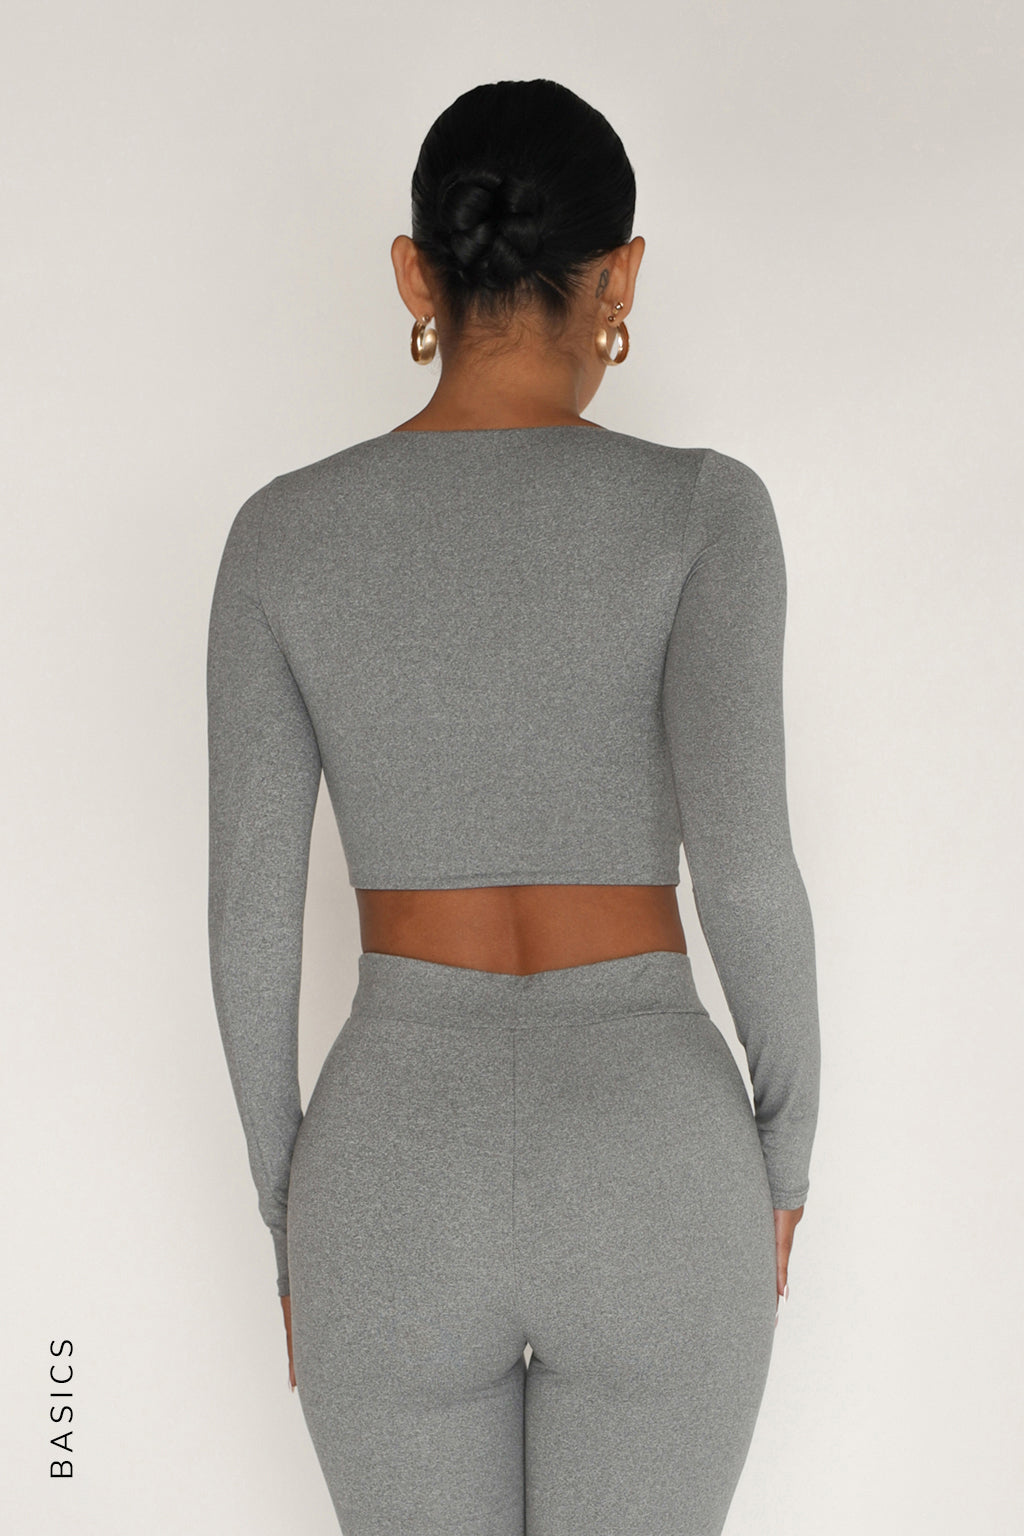 Round Neck Long Sleeve Crop Top - Stone Gray